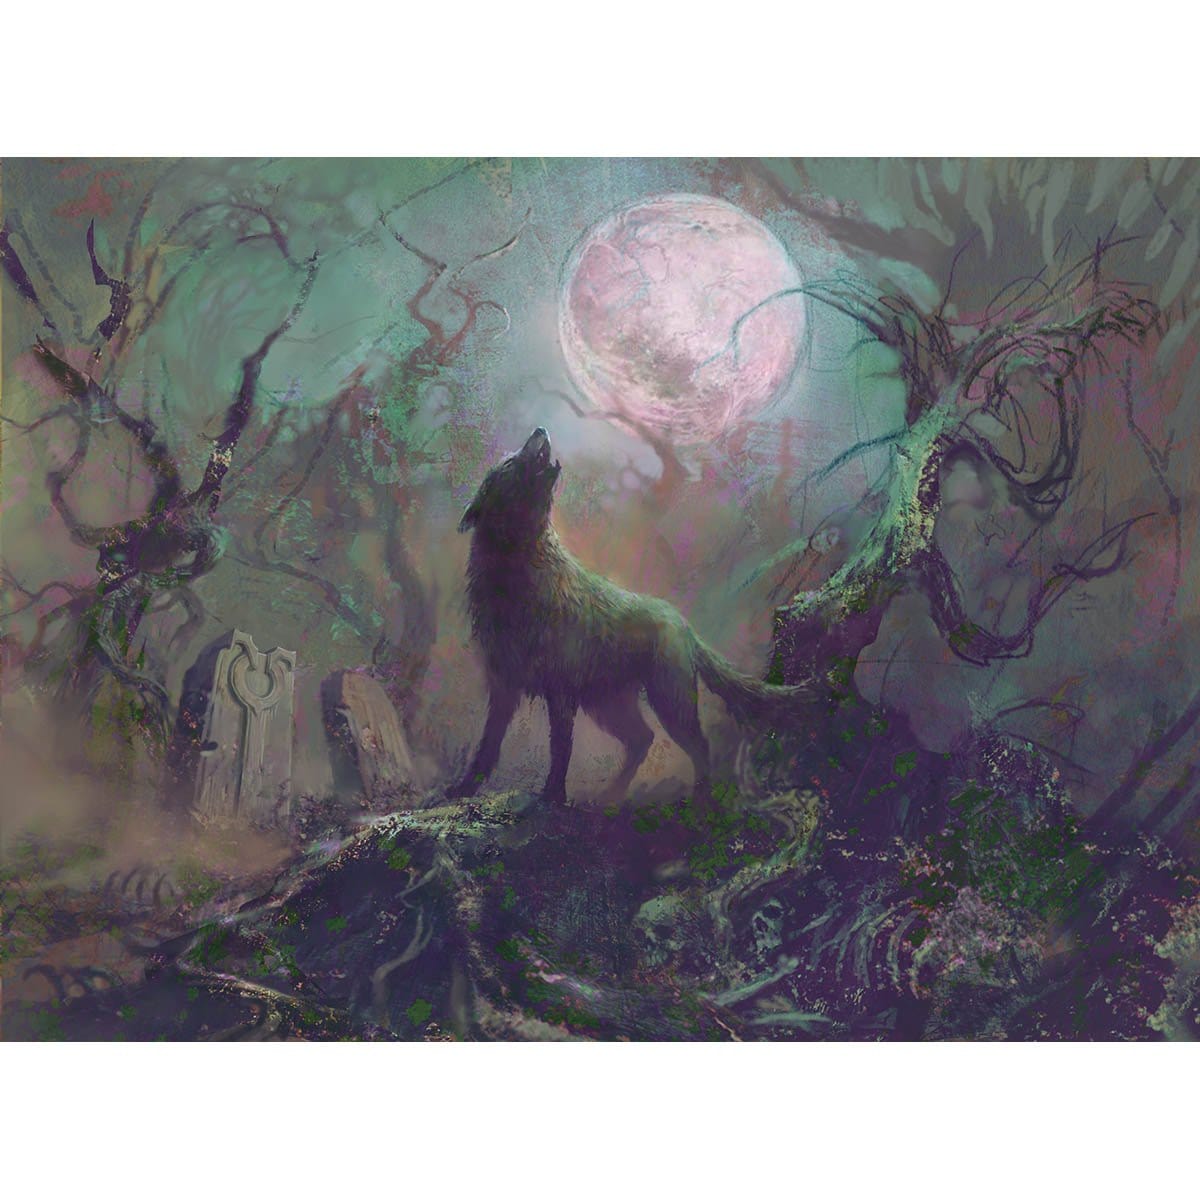 Howling Wolf Print - Print - Original Magic Art - Accessories for Magic the Gathering and other card games